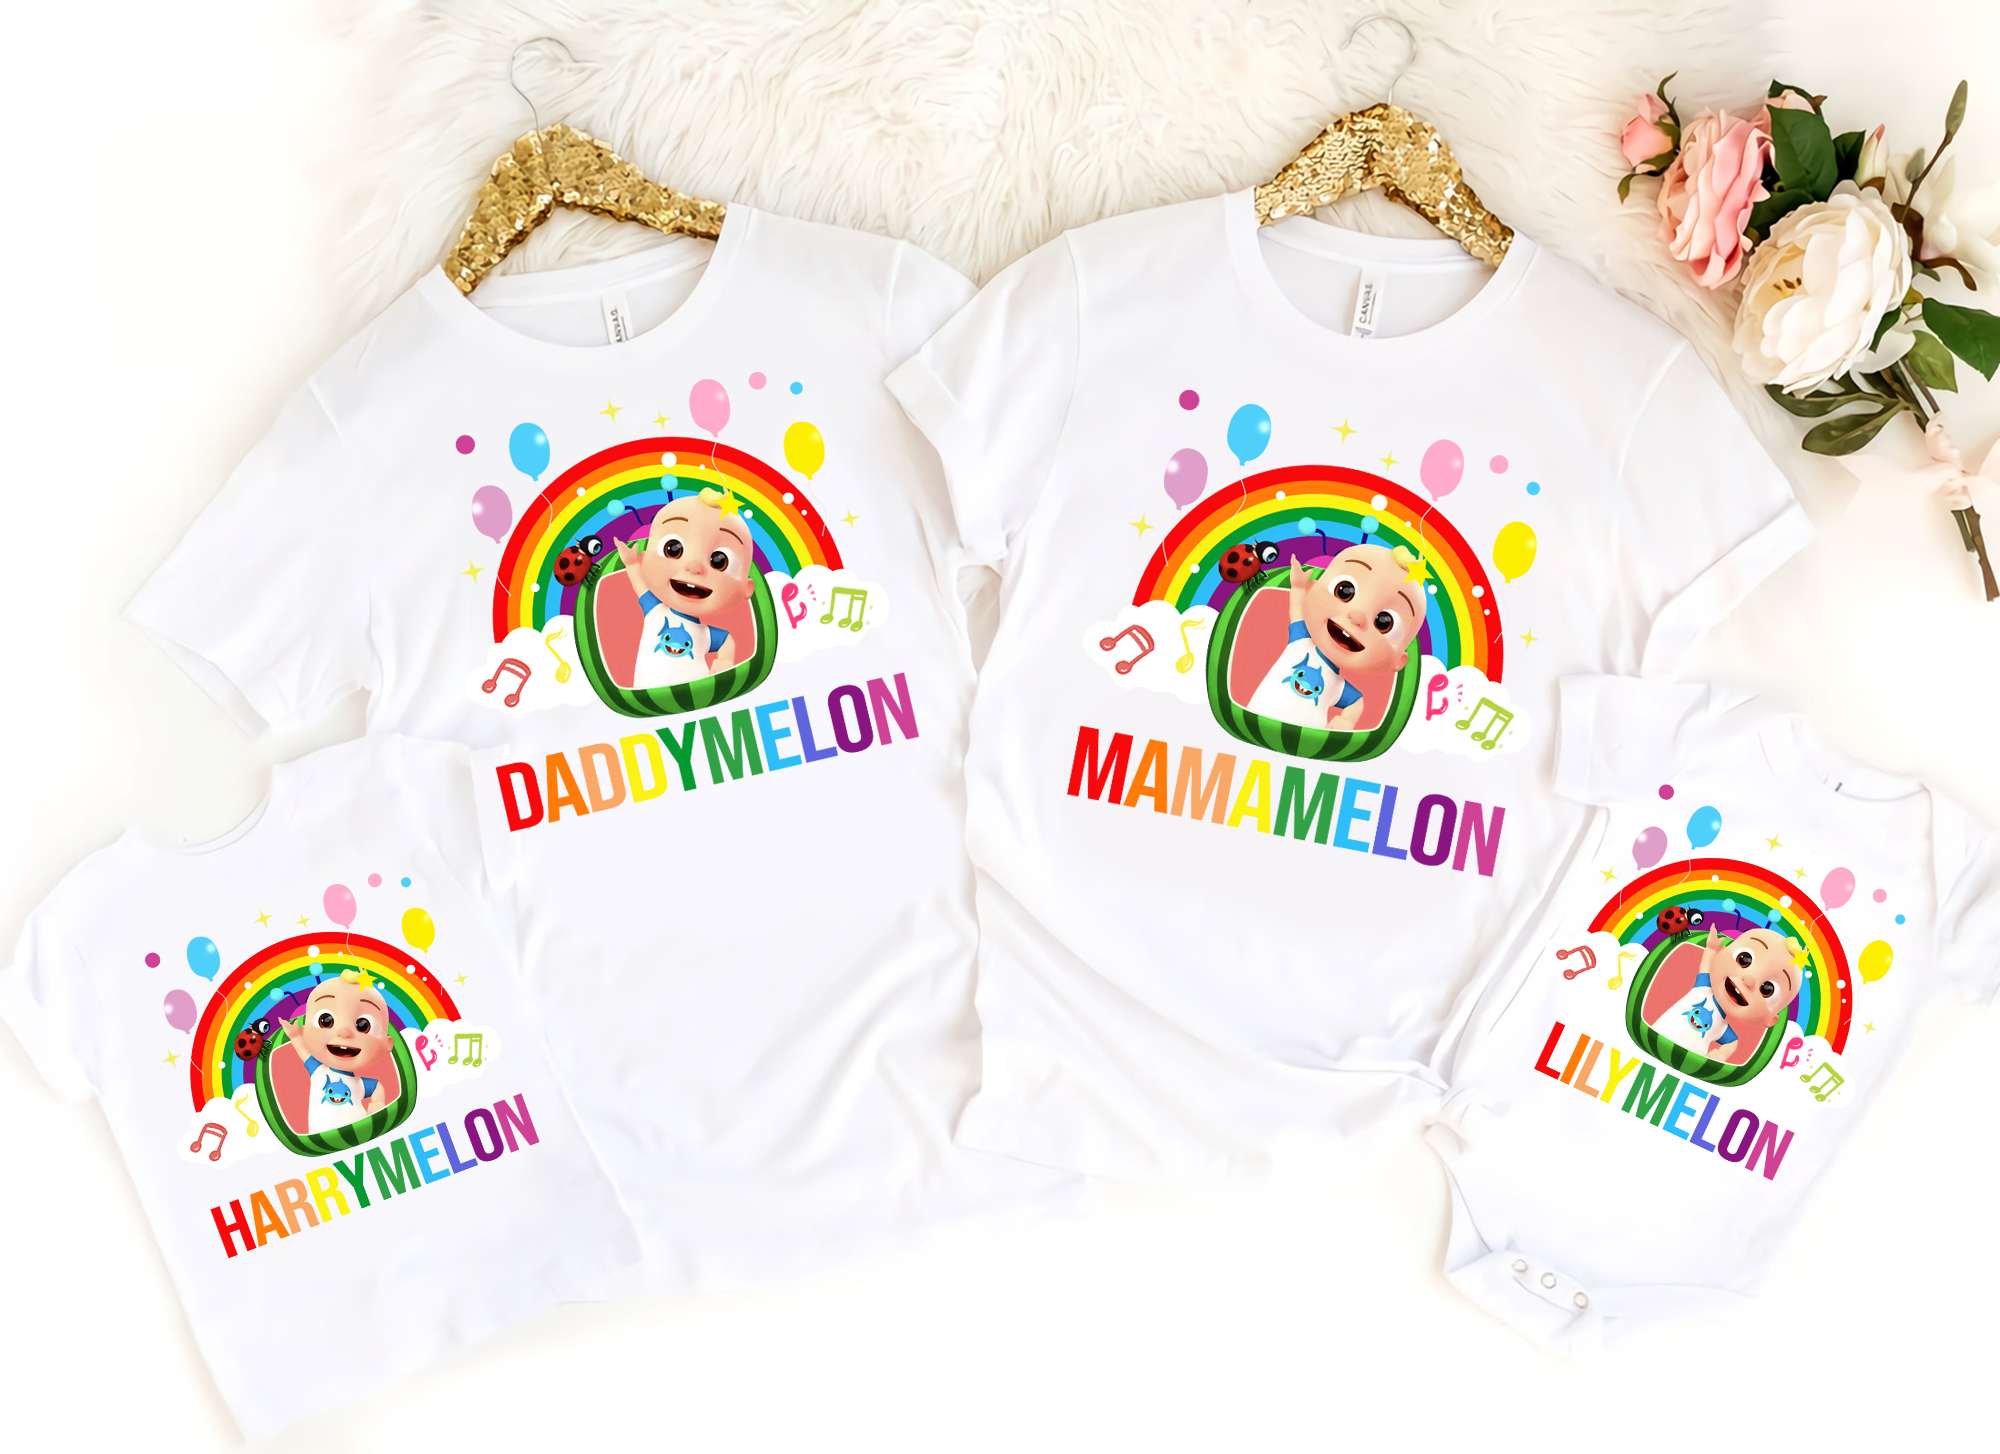 Cocomelon Family Shirts, Cocomelon Birthday Theme Shirt, Custom Cocomelon Shirts, Cocomelon Party Family Matching Shirt, Cute Gift For Kids